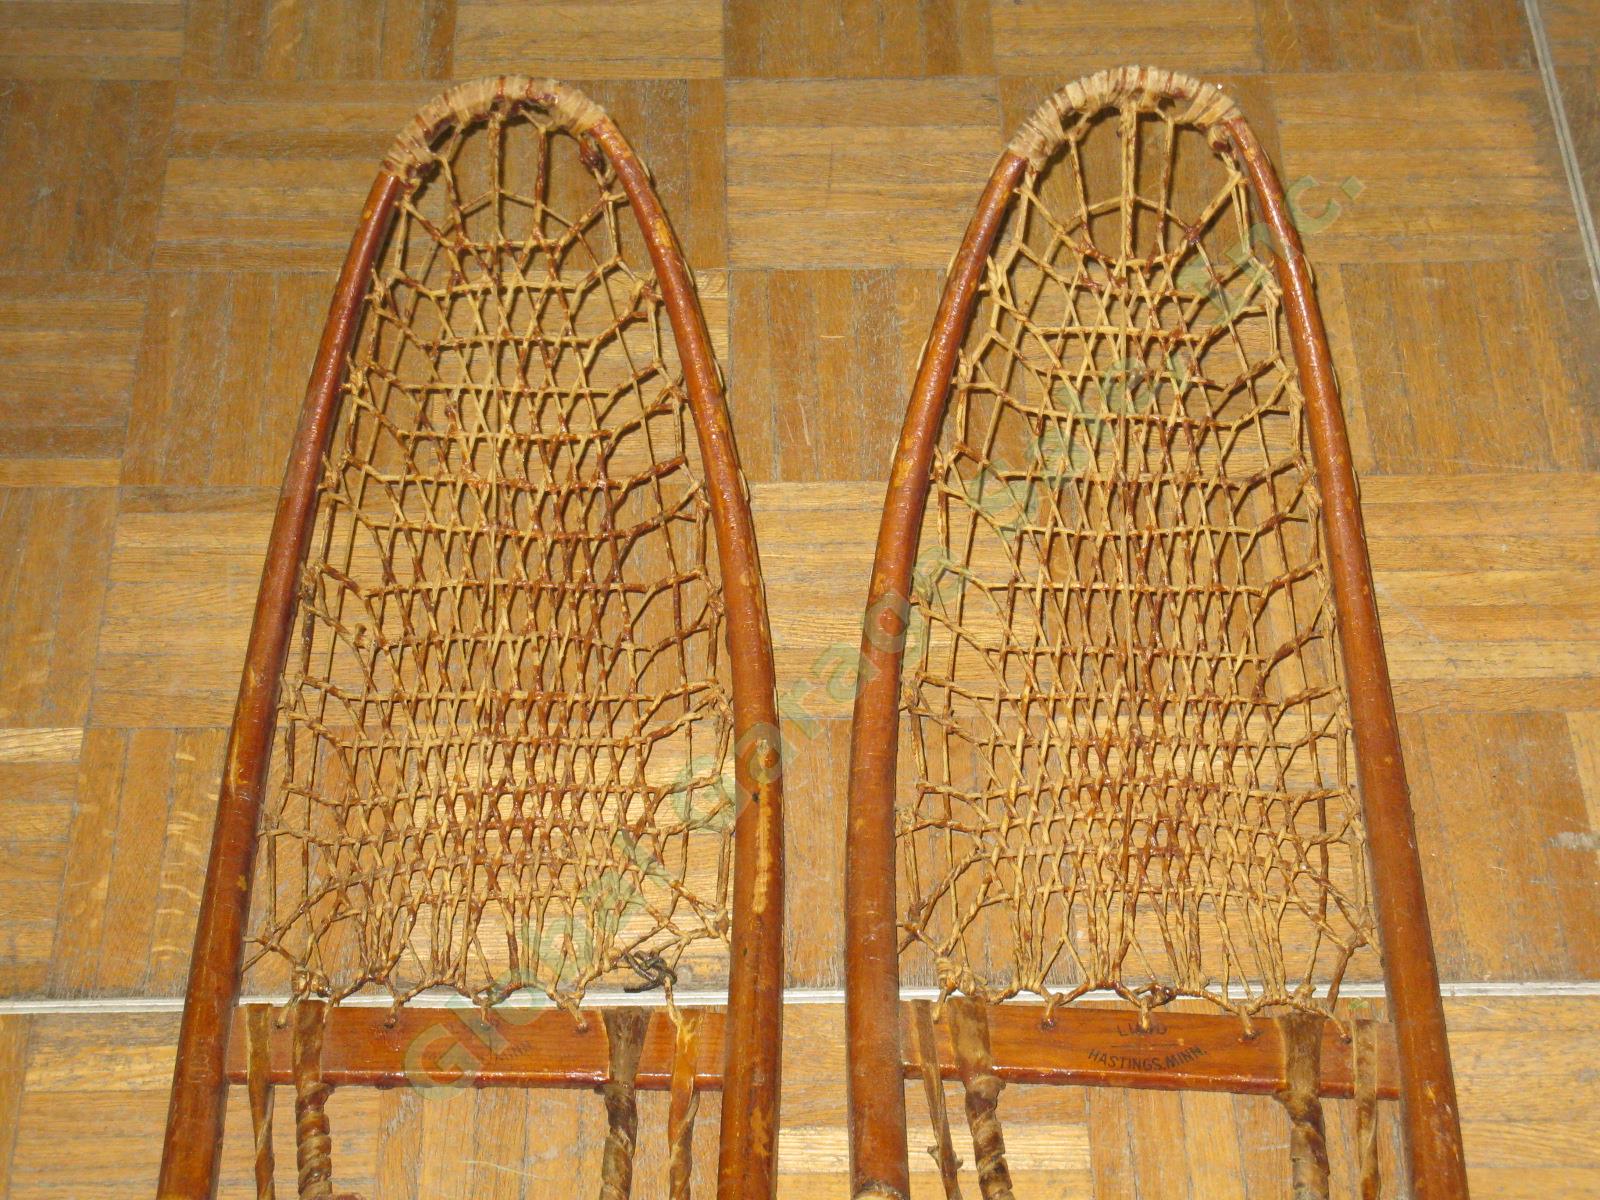 Vtg Antique Lund Hastings Minnesota 10x56 Wooden Frame Leather Binding Snowshoes 1